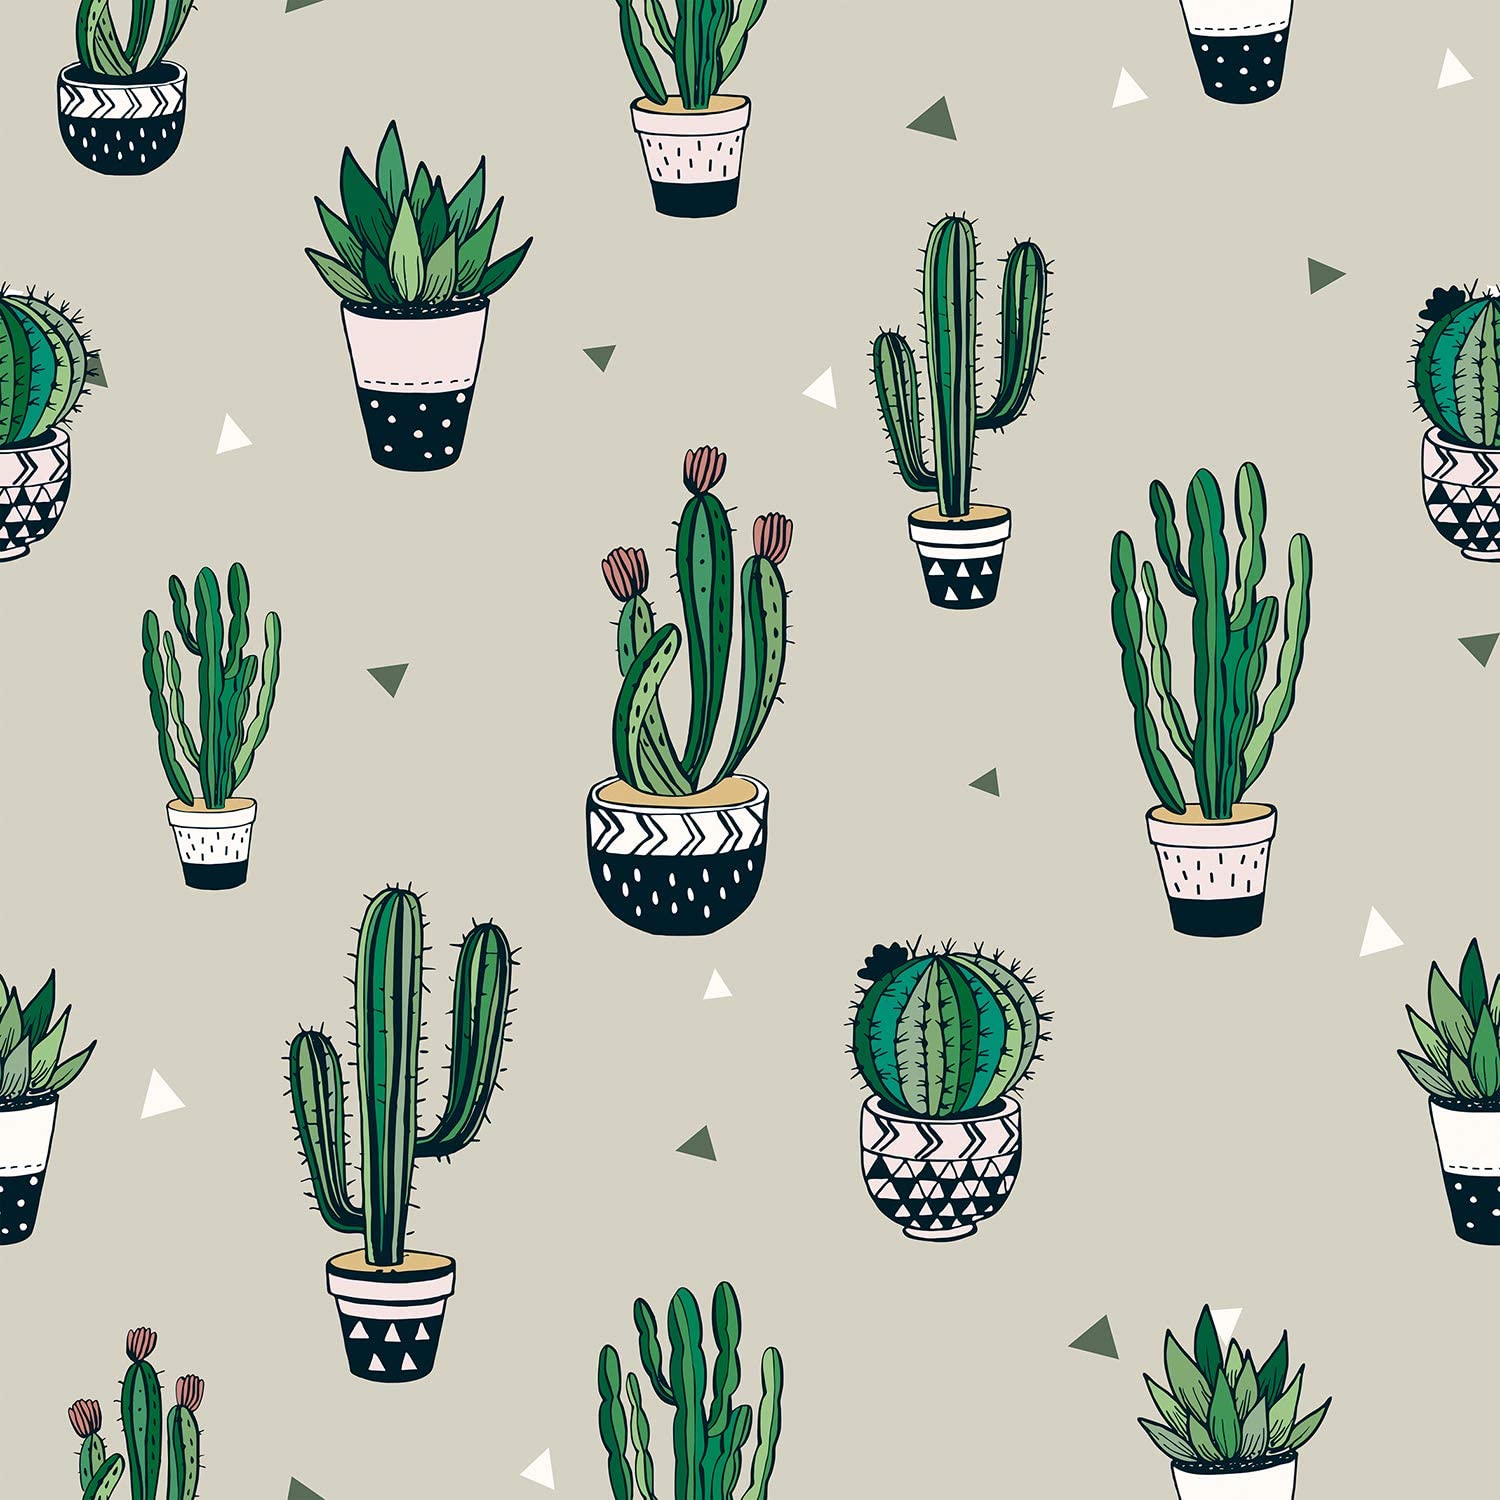 A pattern of cacti in pots on a grey background - Cactus